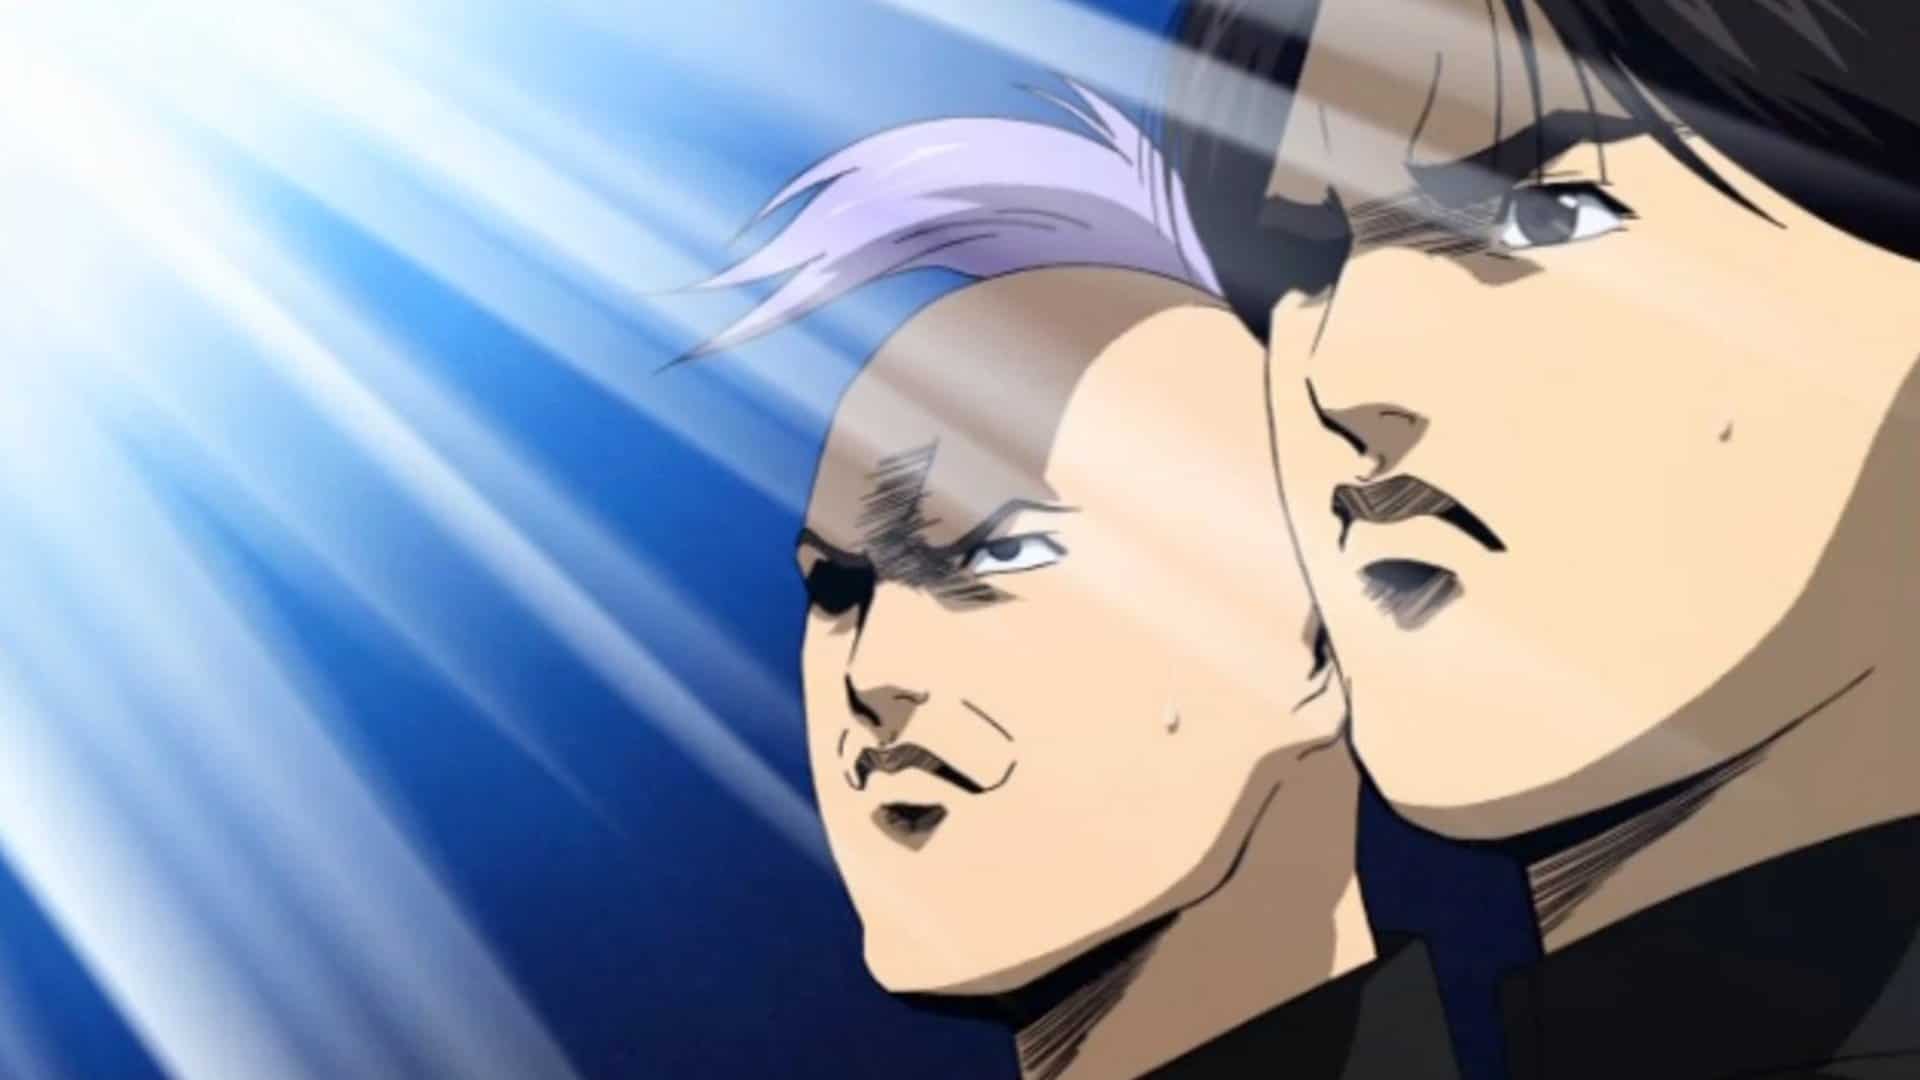 A dramatic screenshot of two characters from Cromartie High School gazing into the light.